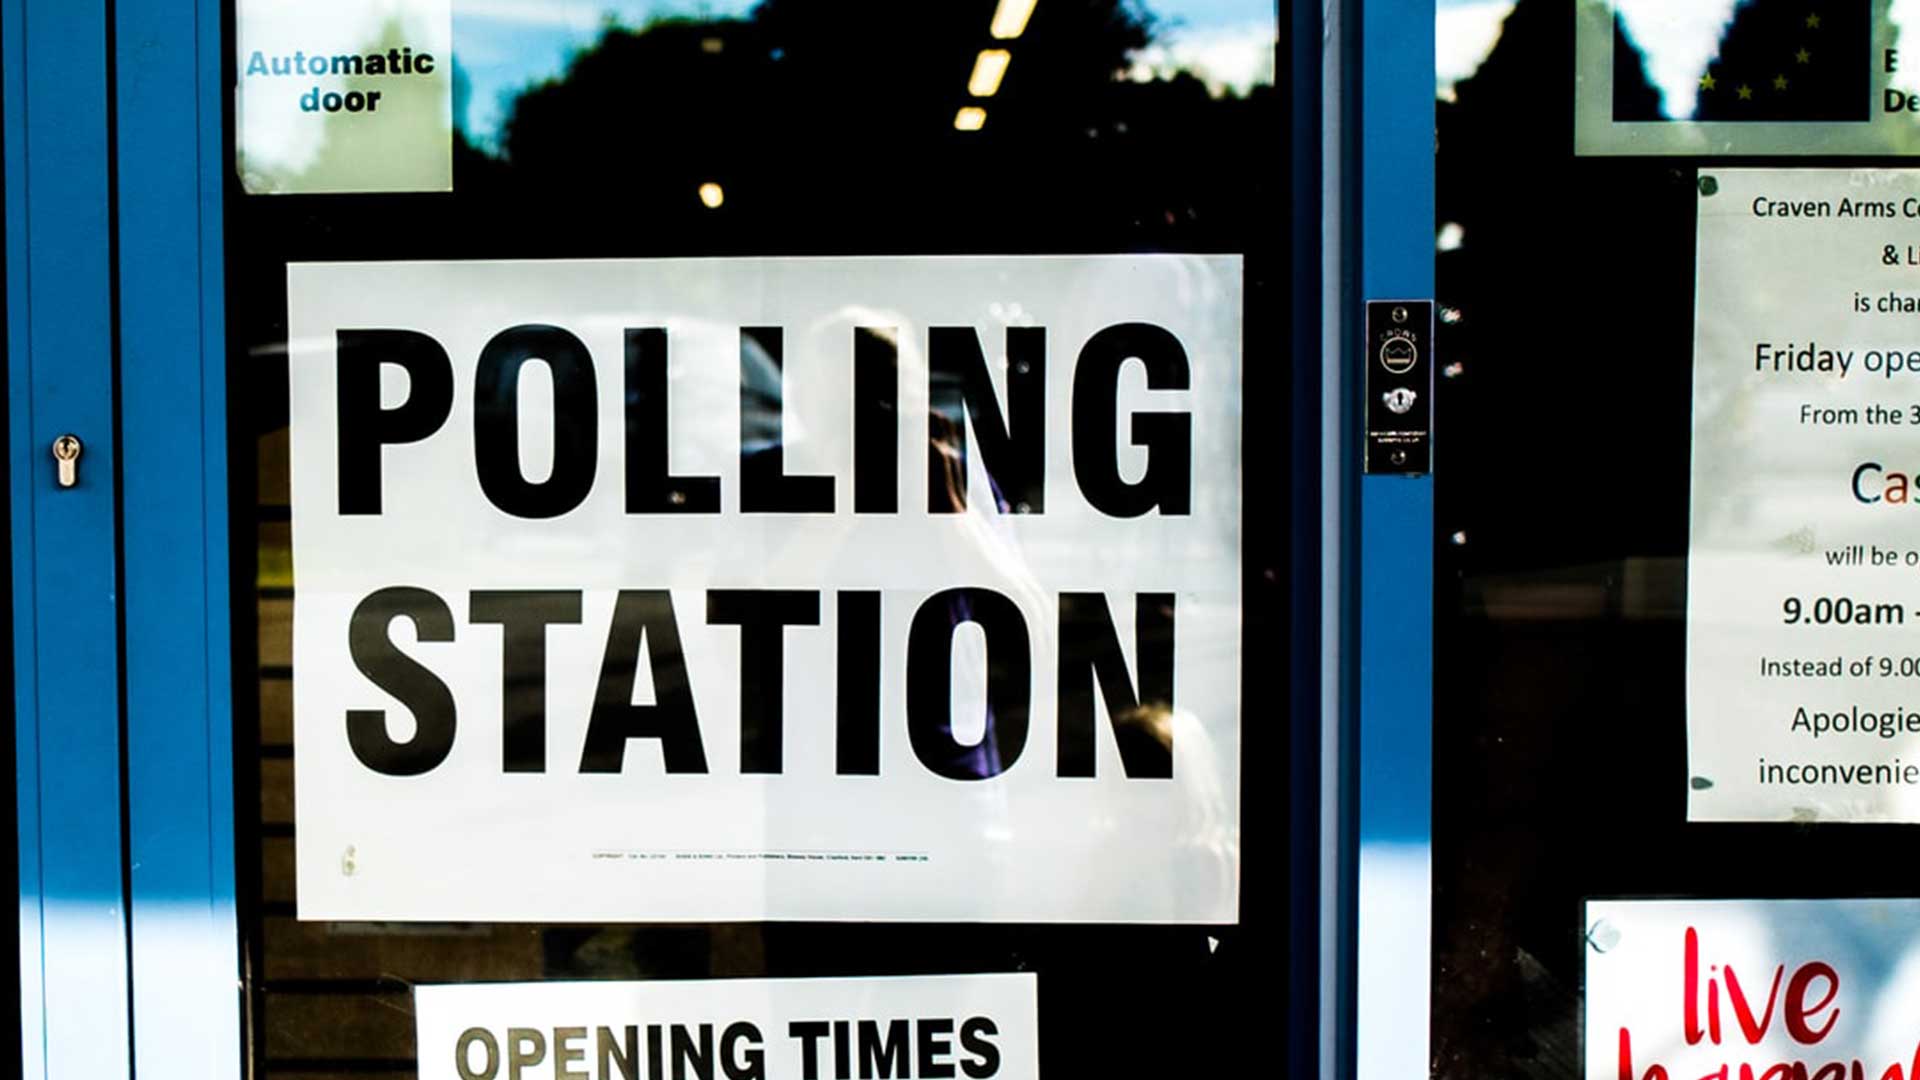 Door with a sign that reads "POLLING STATION"